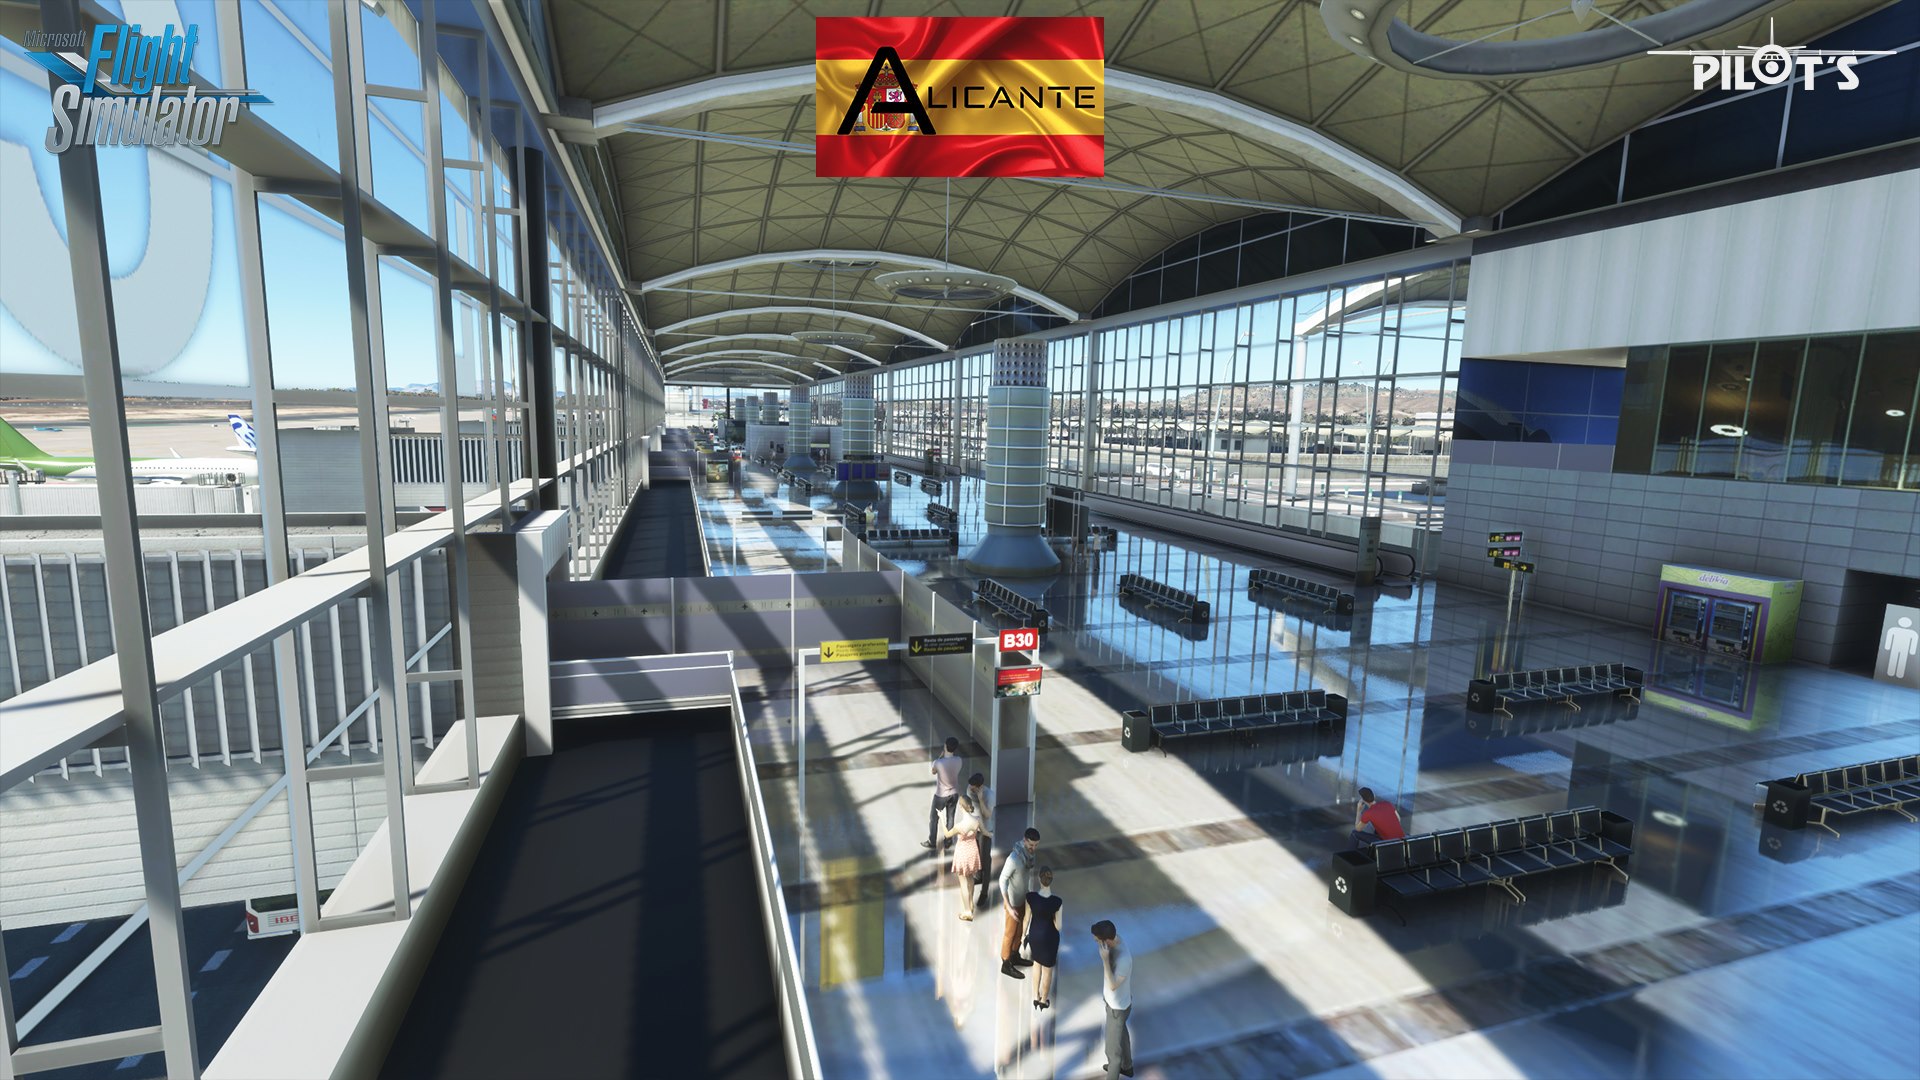 PILOT'S Alicante Airport Back In Stores After Legal Disputes - TDM Scenery Design